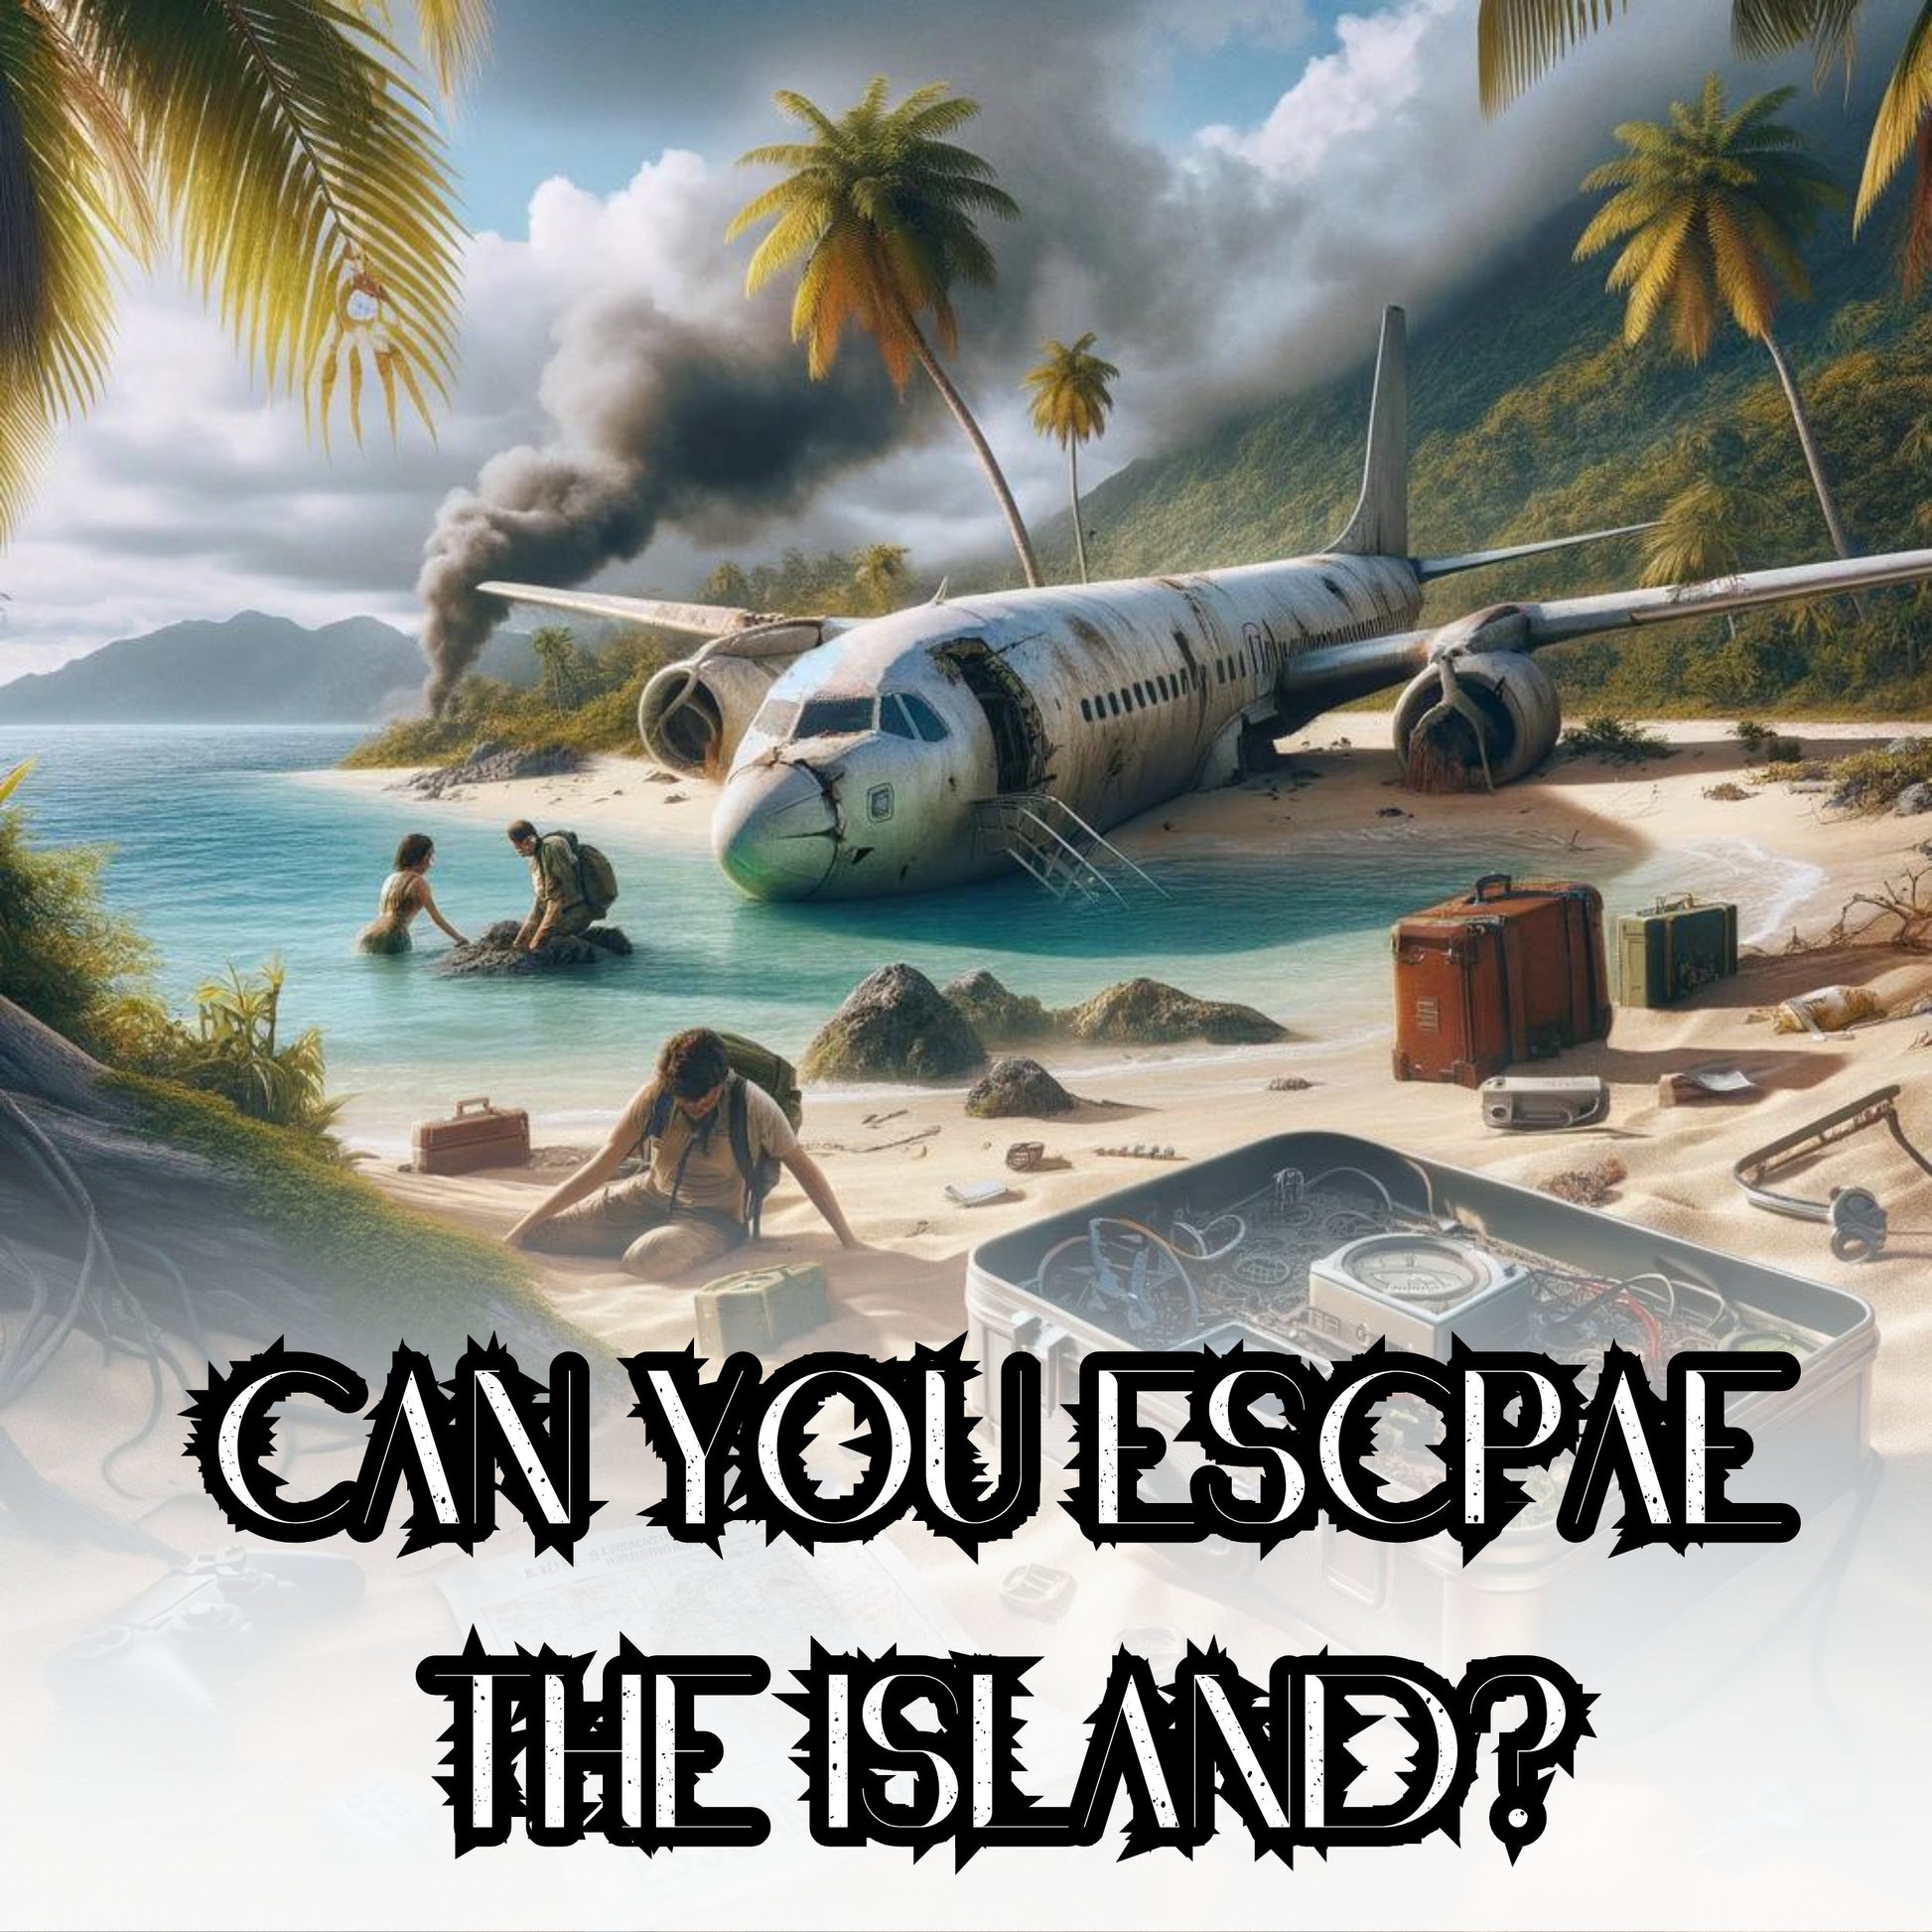 Flight 345: Island Escape Printable escape room instant download family game night escape the island party escape room Birthday party game